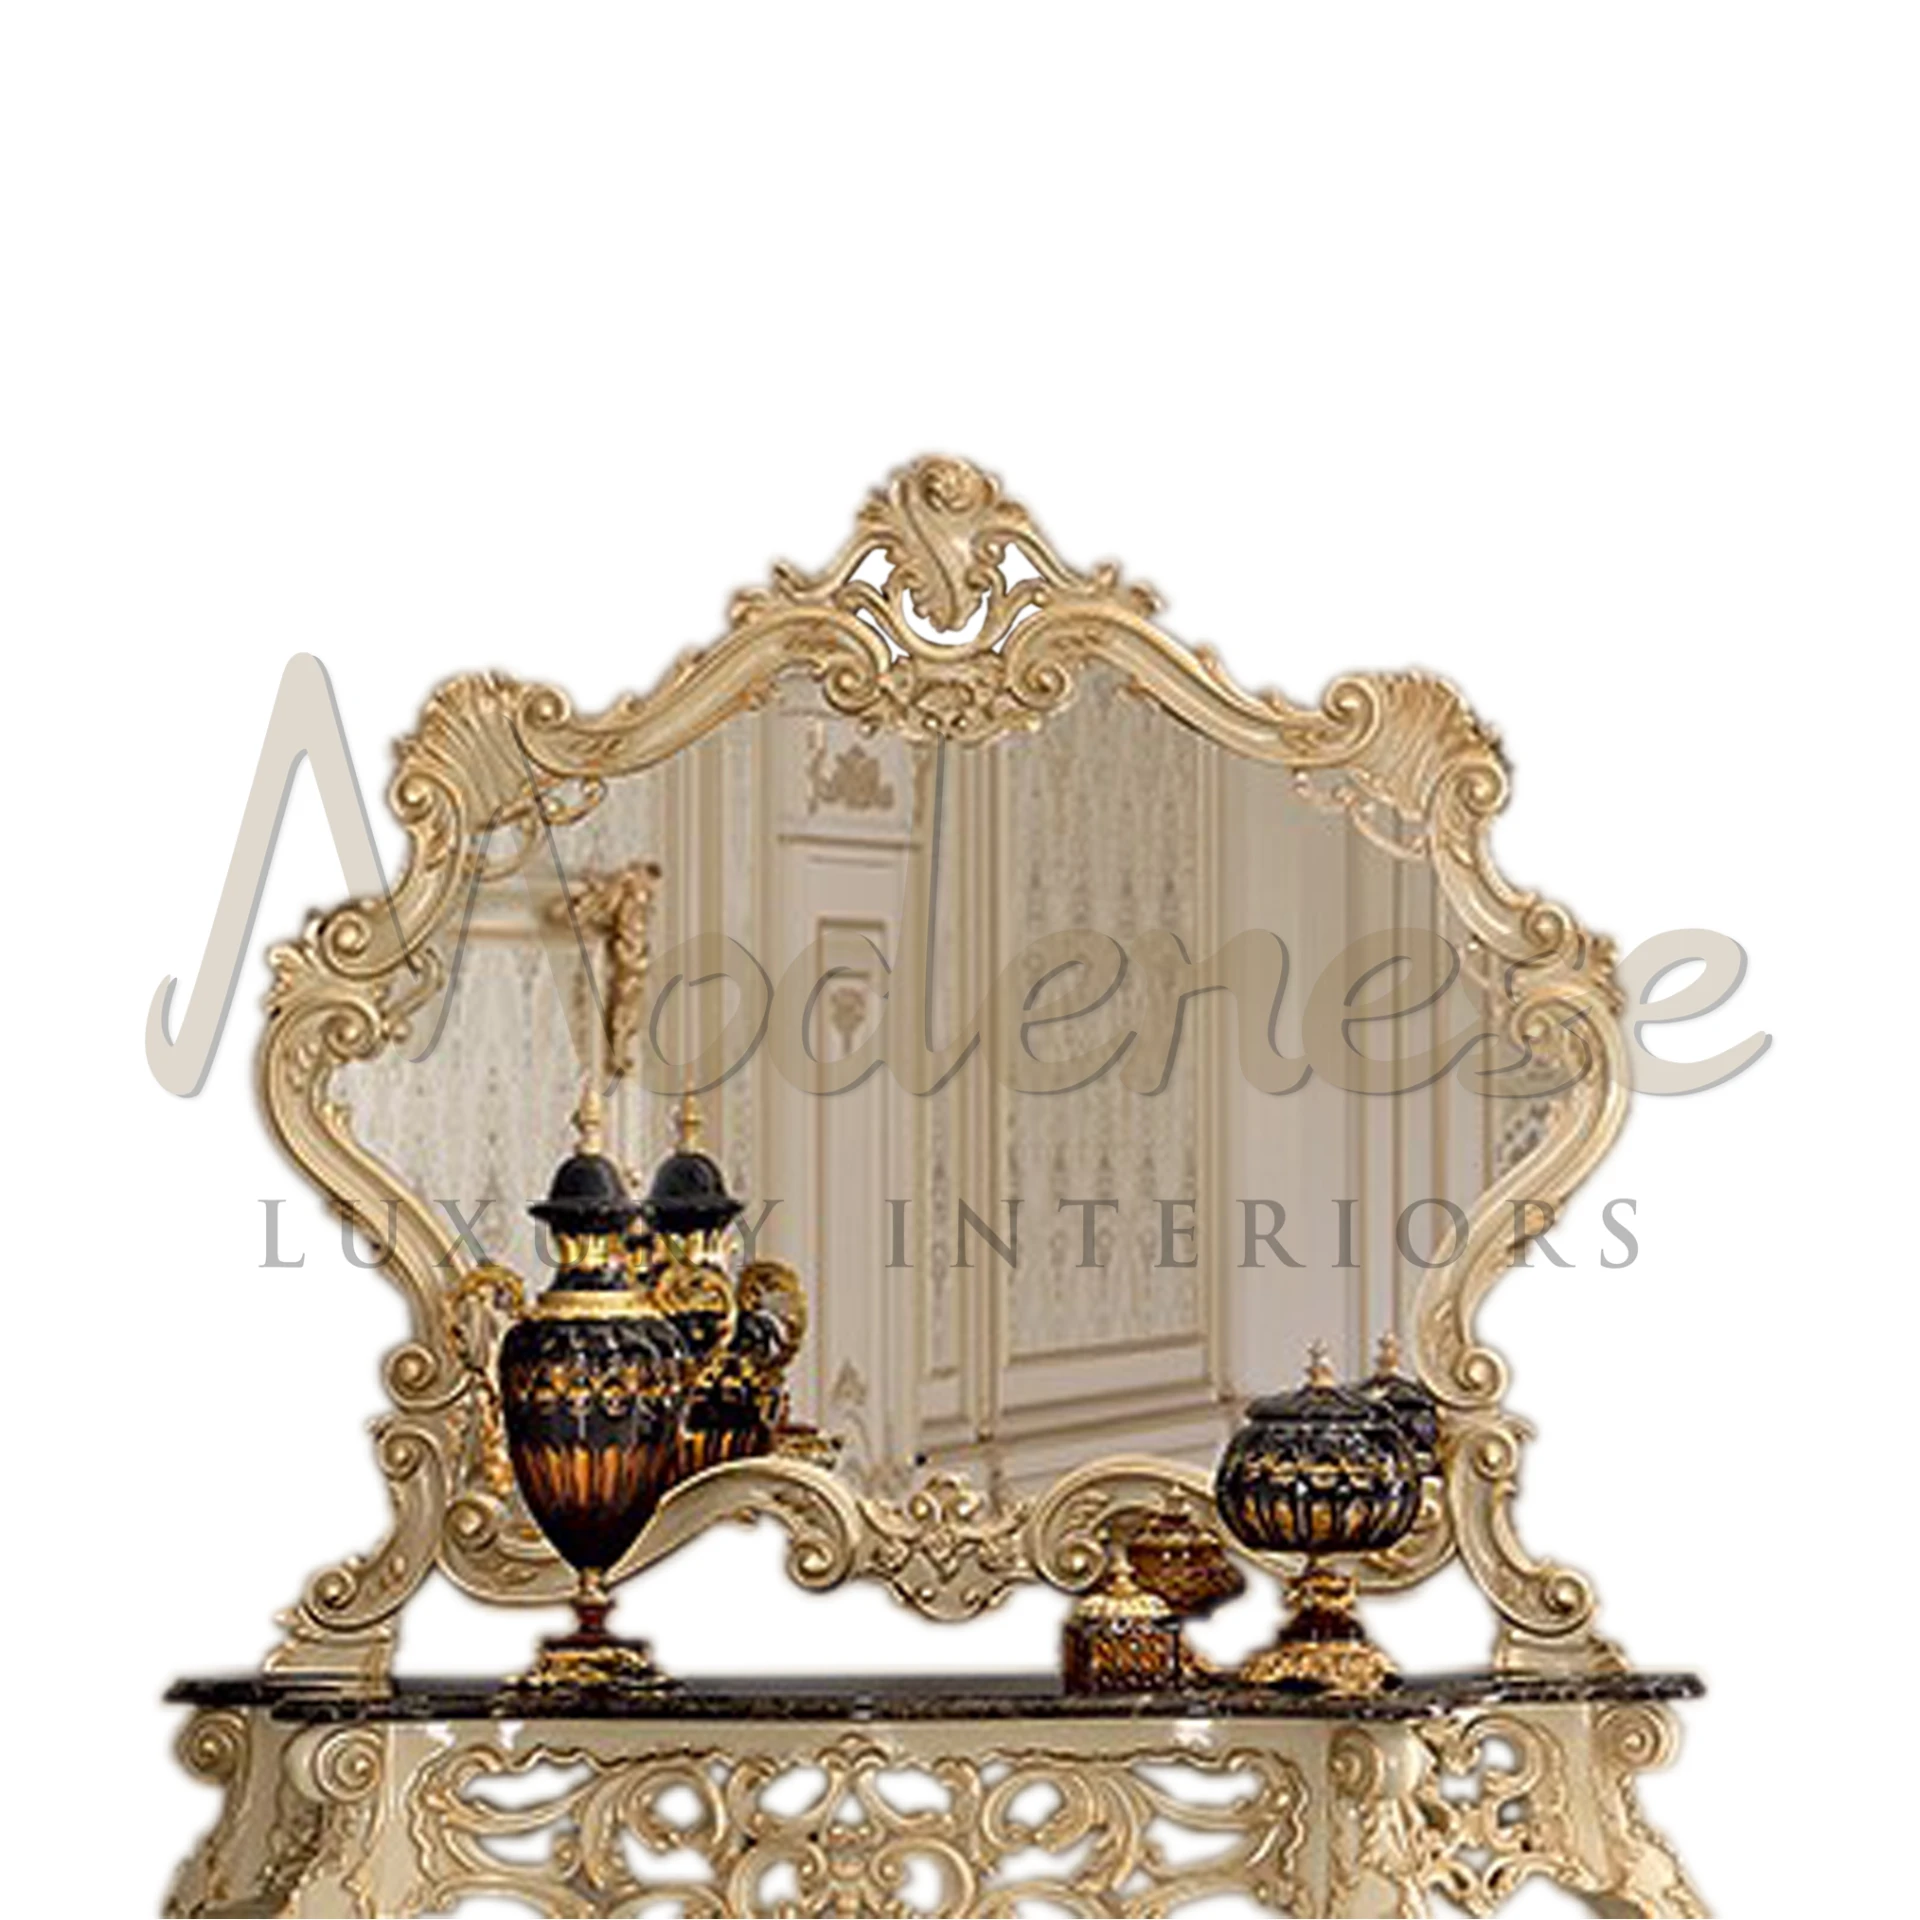 Florentine Figured Mirror, a luxury mirror crafted with gold leaf by Italian artisans, epitomizing handmade elegance in home decor.